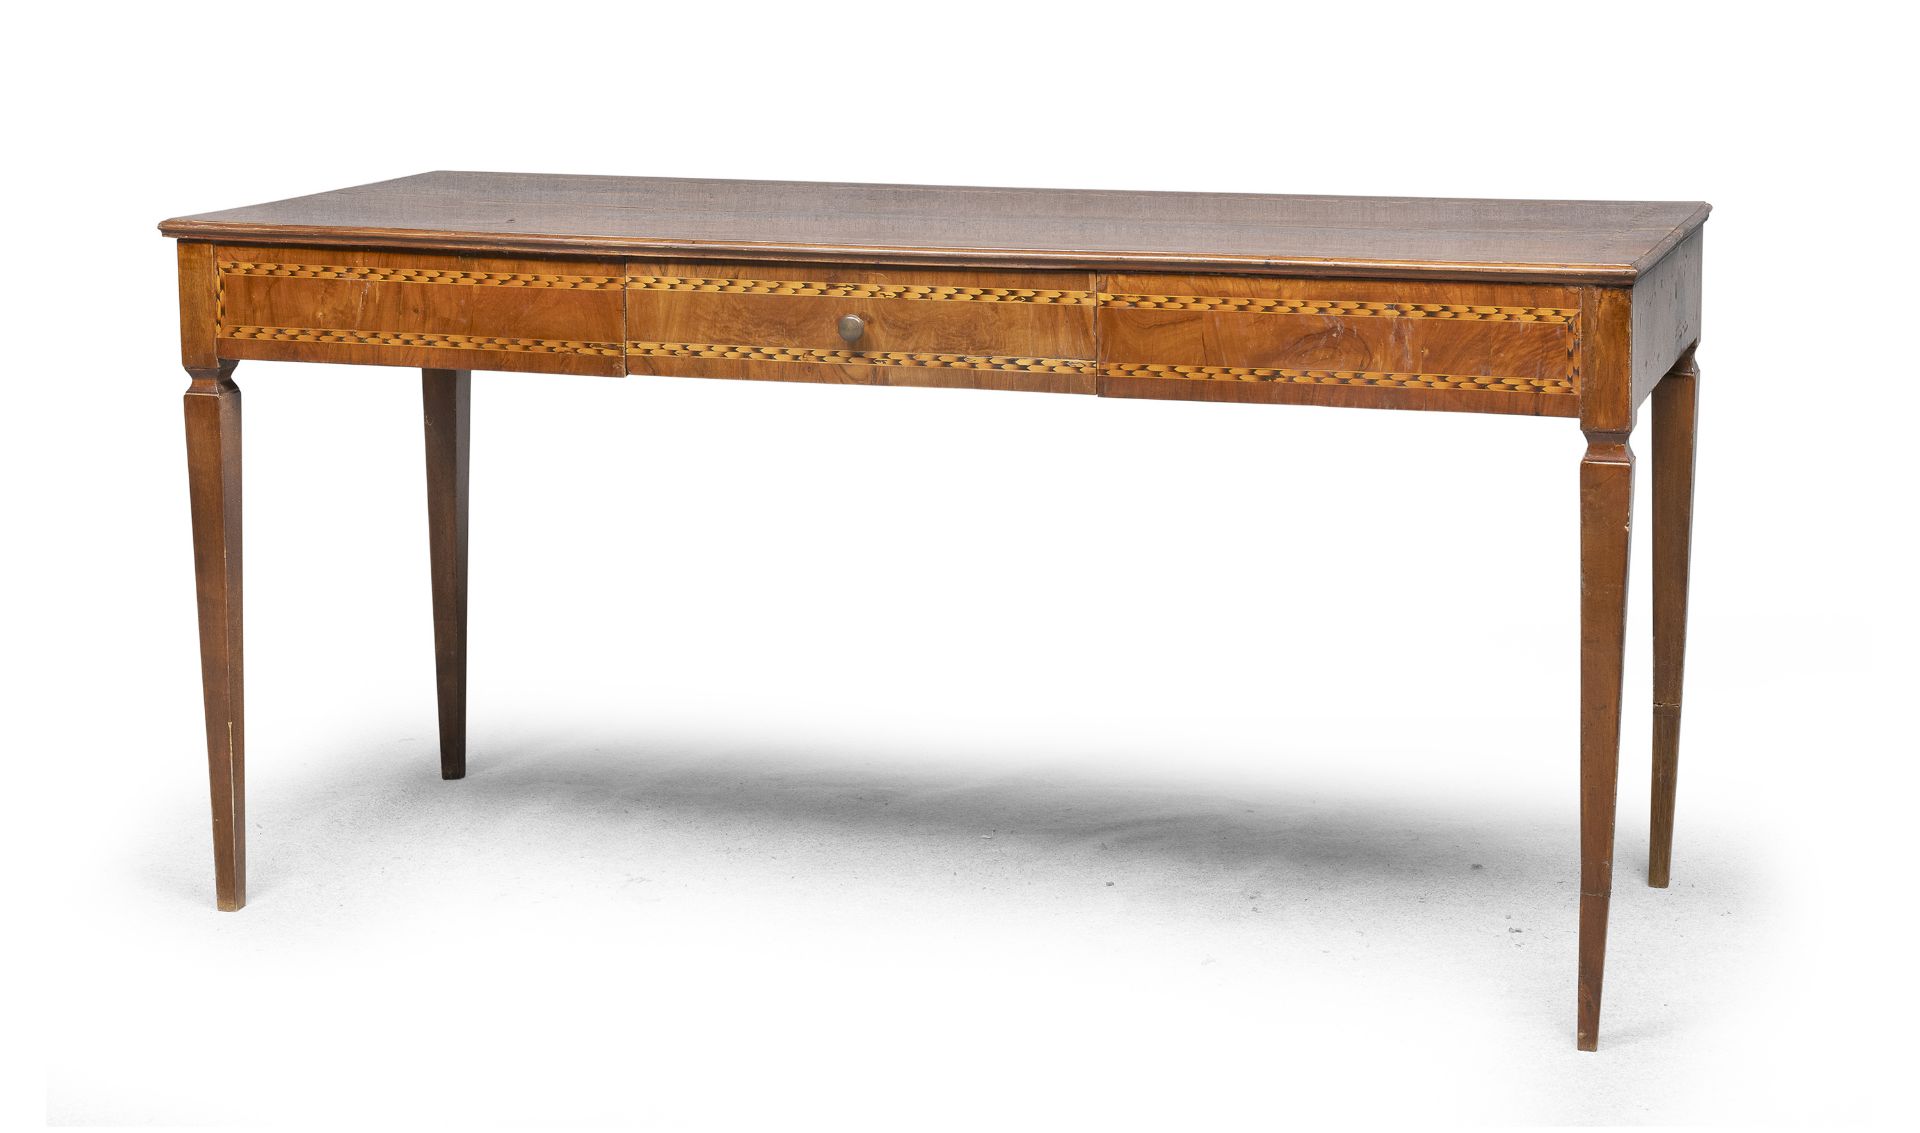 LARGE WALNUT DESK LATE 18TH EARLY 19TH CENTURY